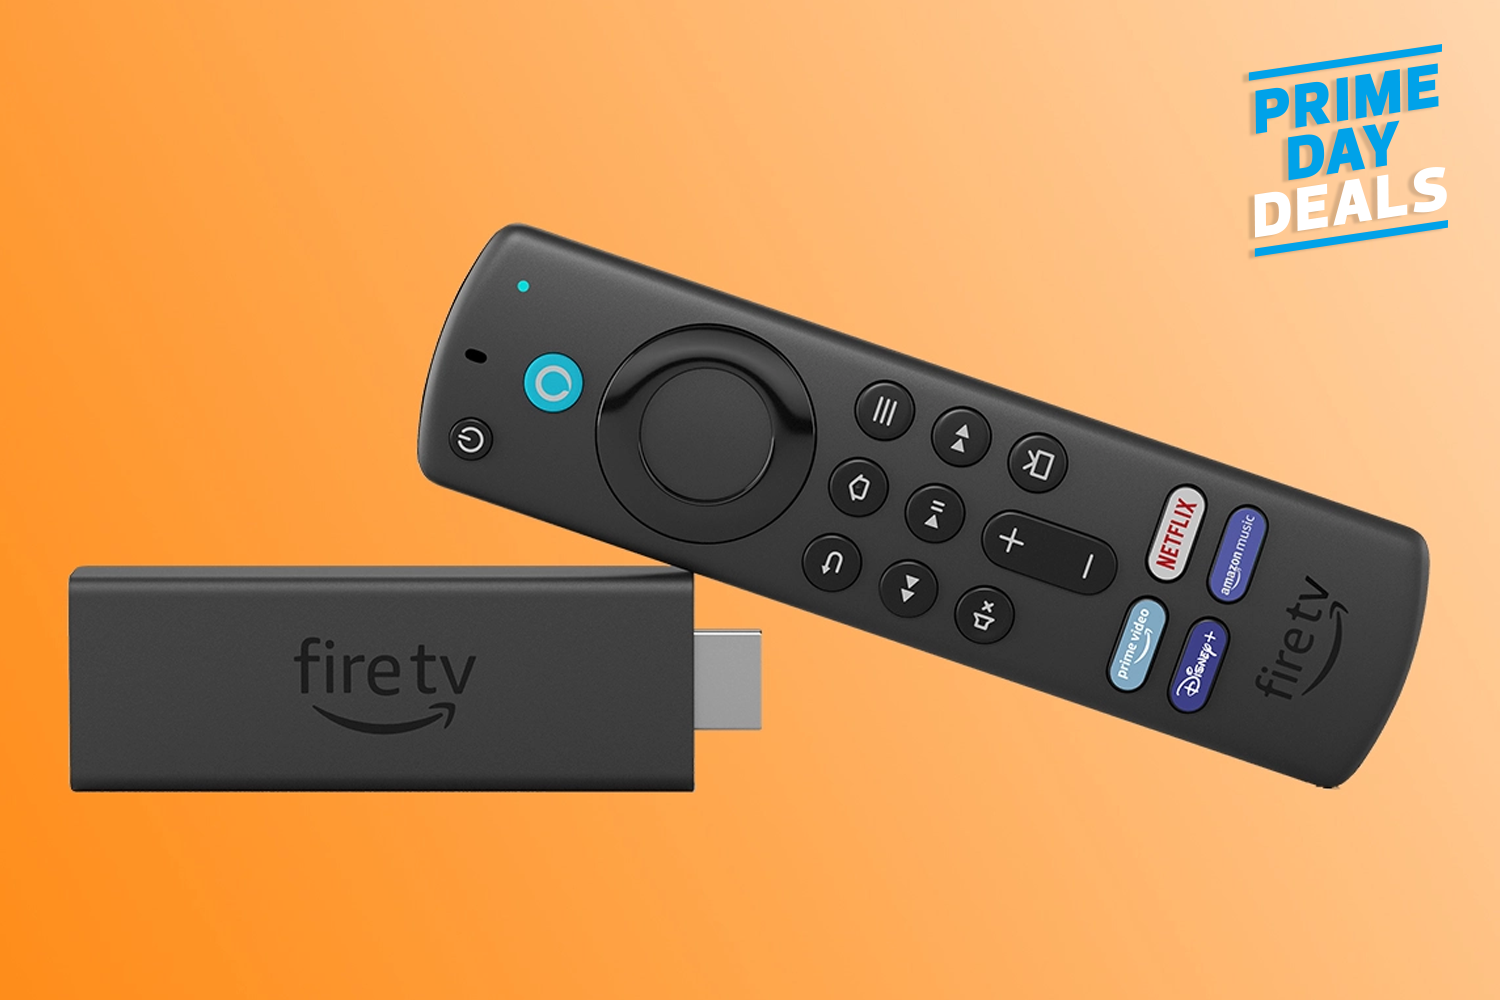 Fire TV Stick with Alexa Voice Remote is 50% off with this